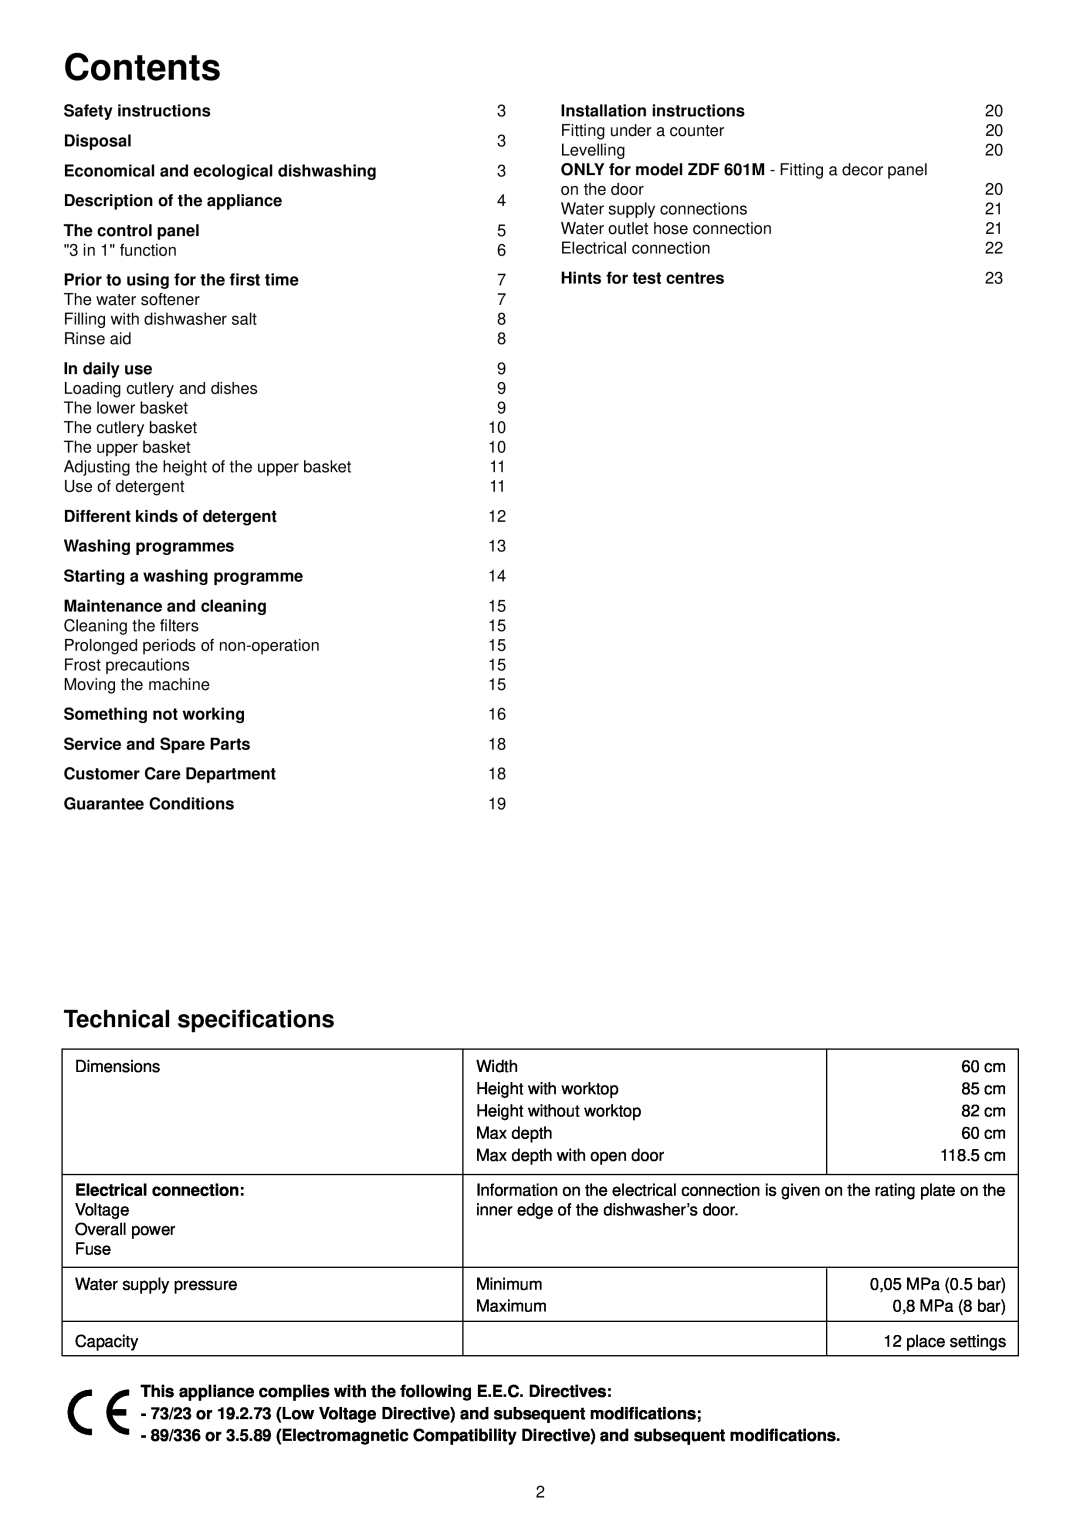 Zanussi ZDF 601 manual Contents, Technical specifications 